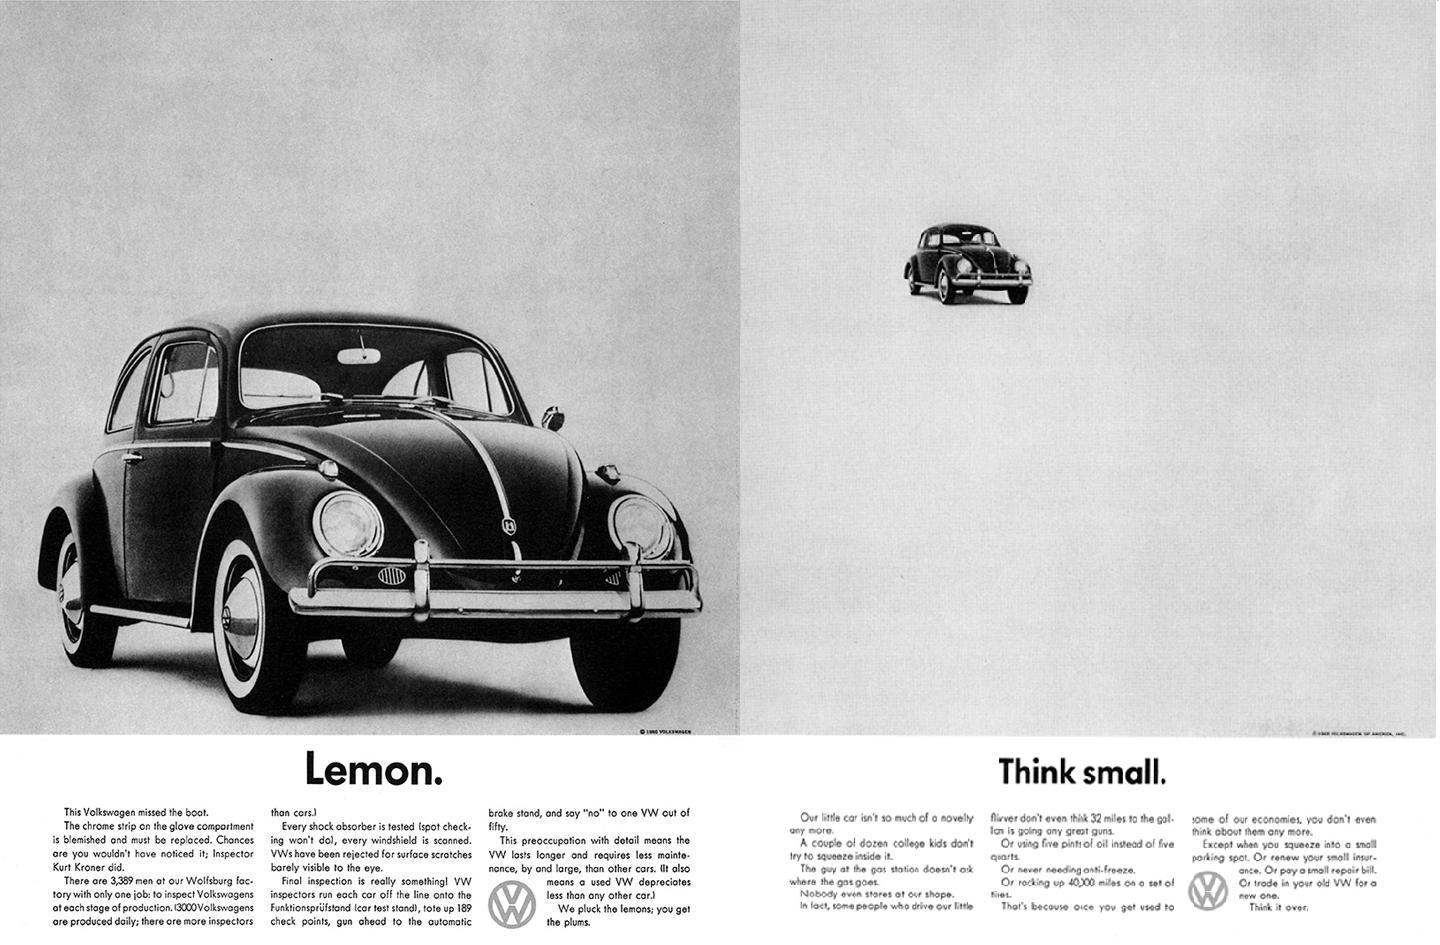 Volkswagen_Think small 03 lemon-and-think-small-ads.jpg